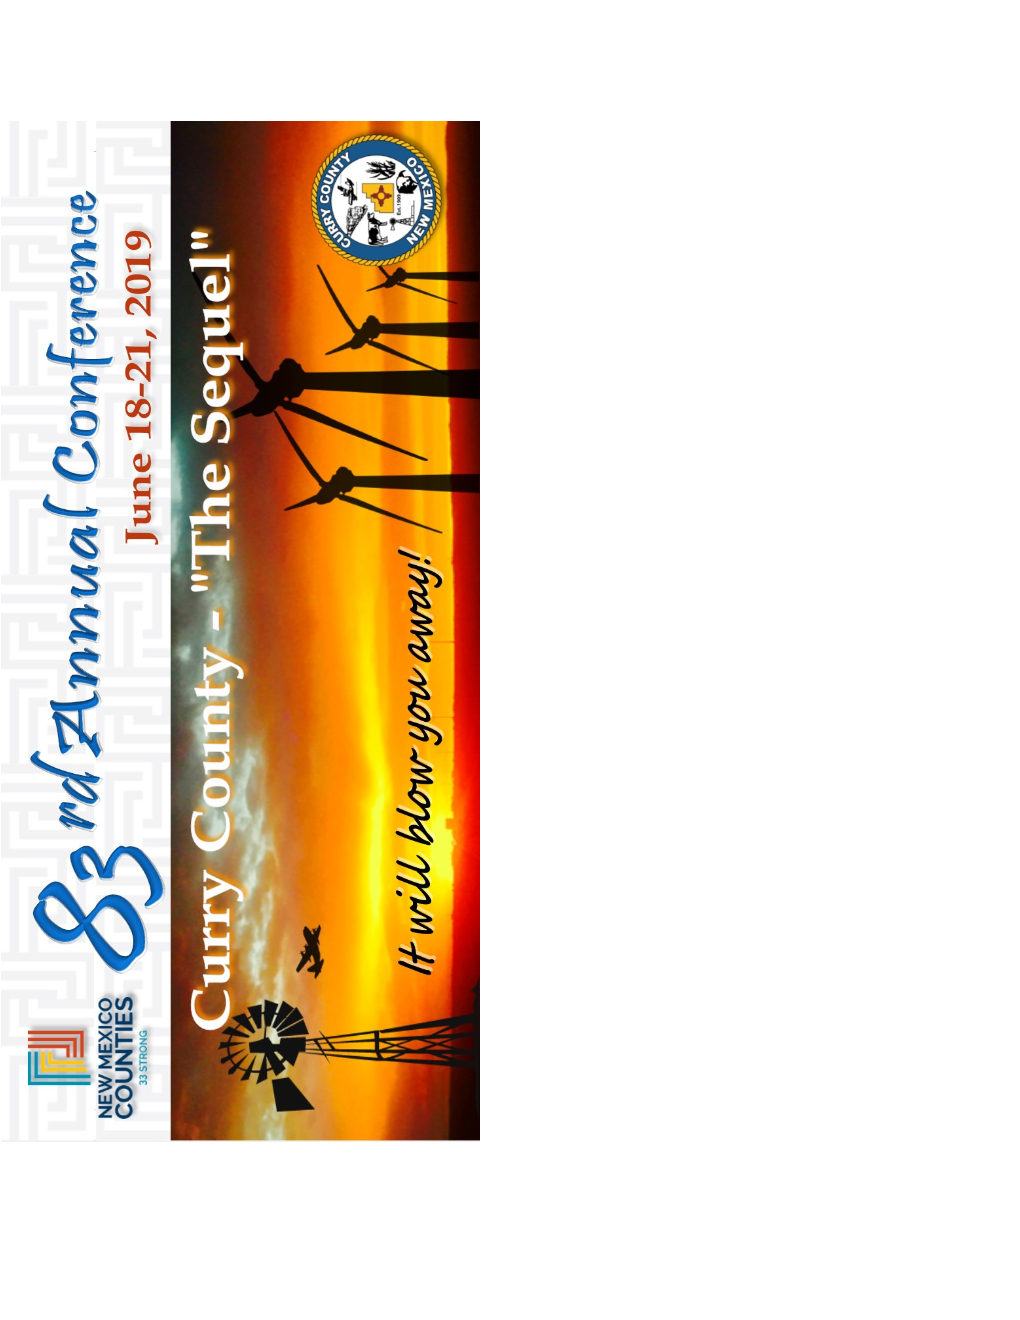 83Rd Annual Conference Program